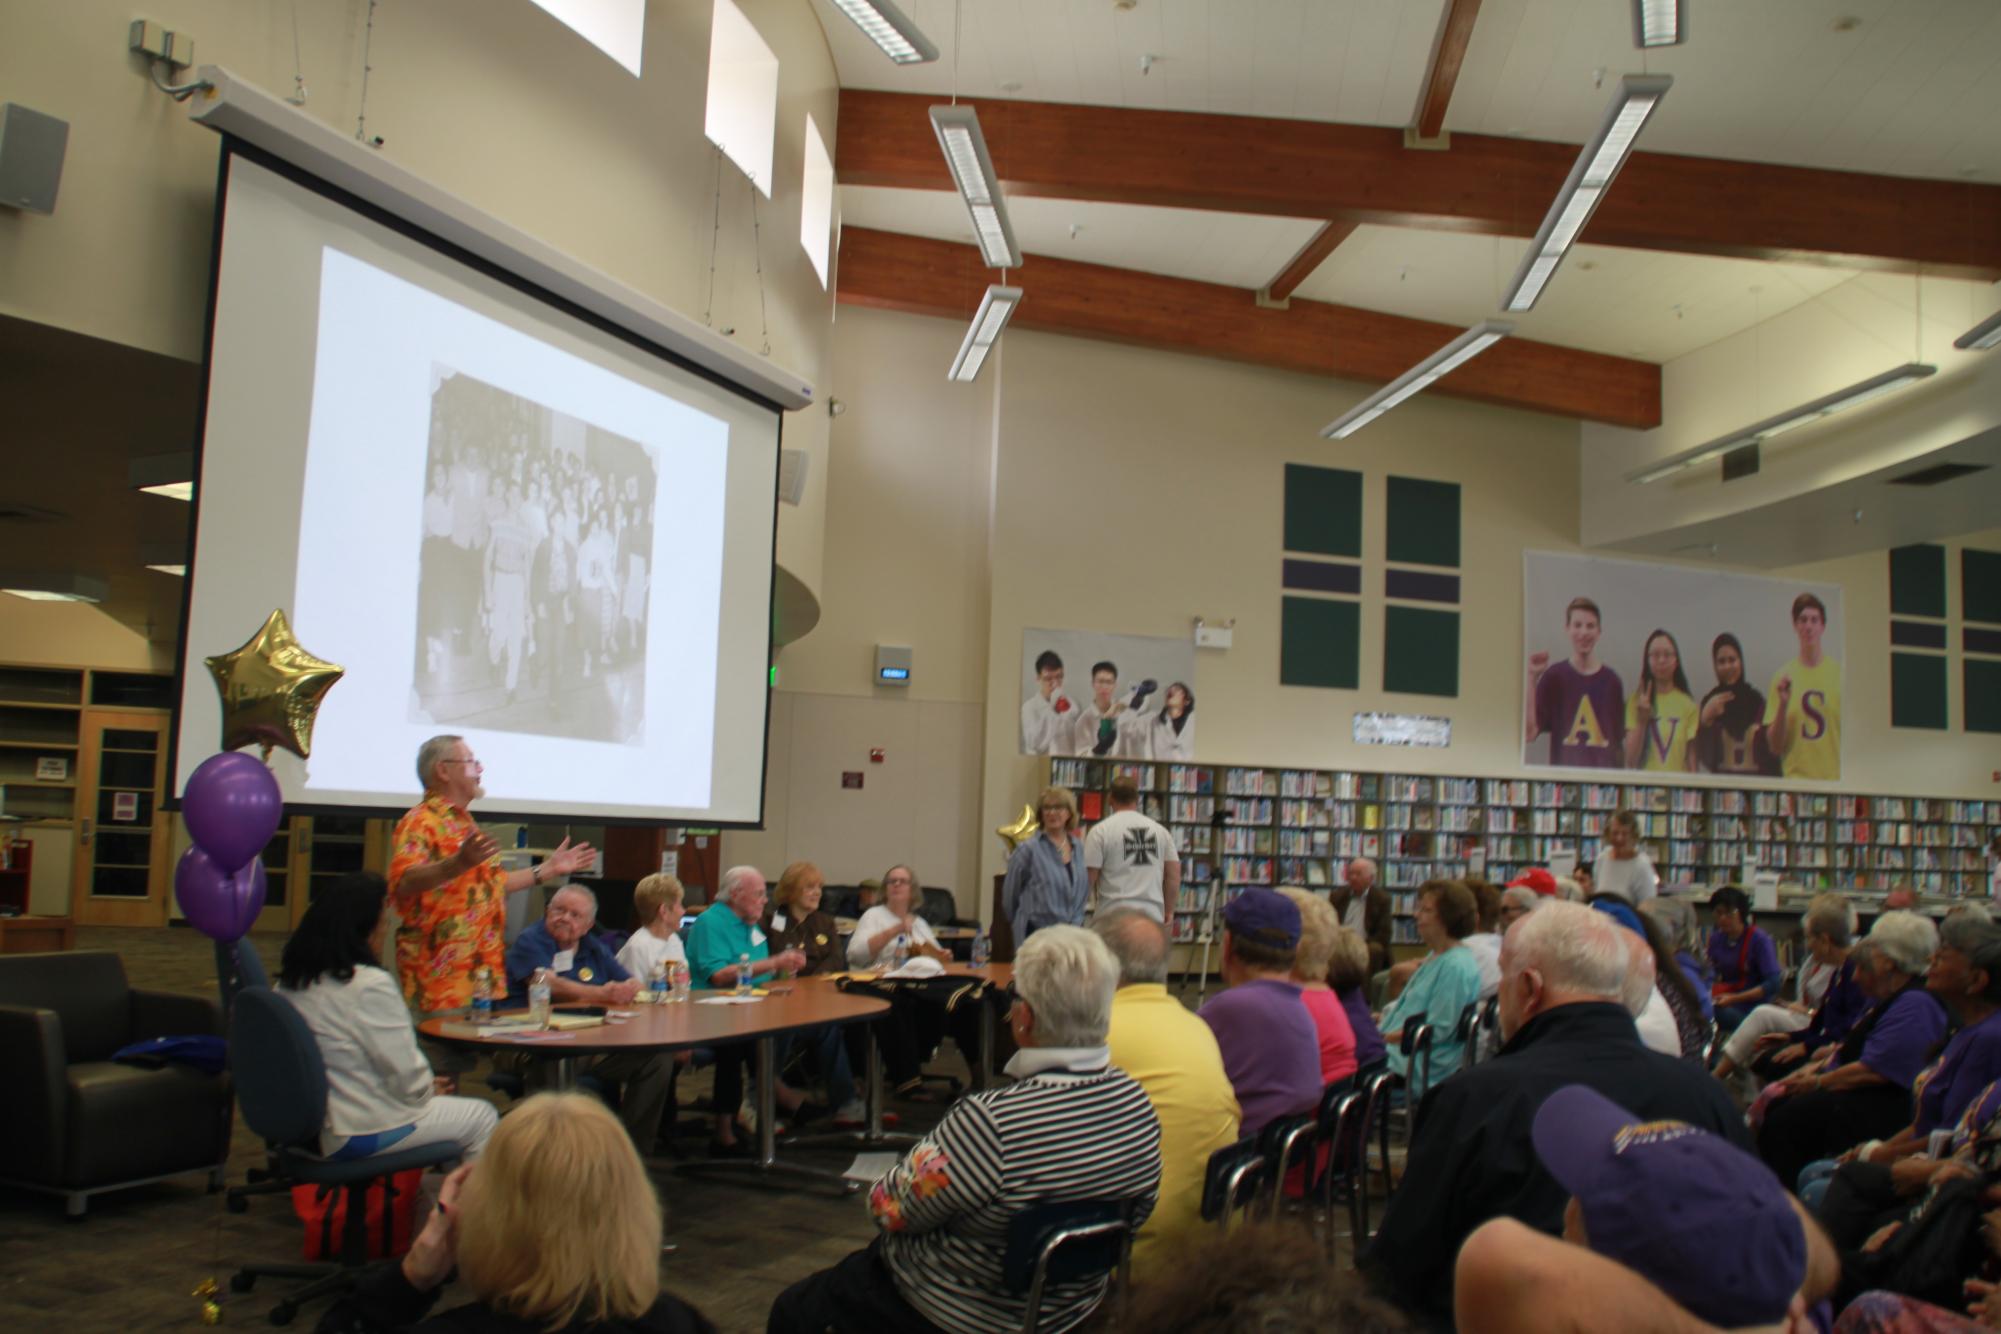 Alums+hold+panel+about+life+in+Pleasanton+during+the+1950s